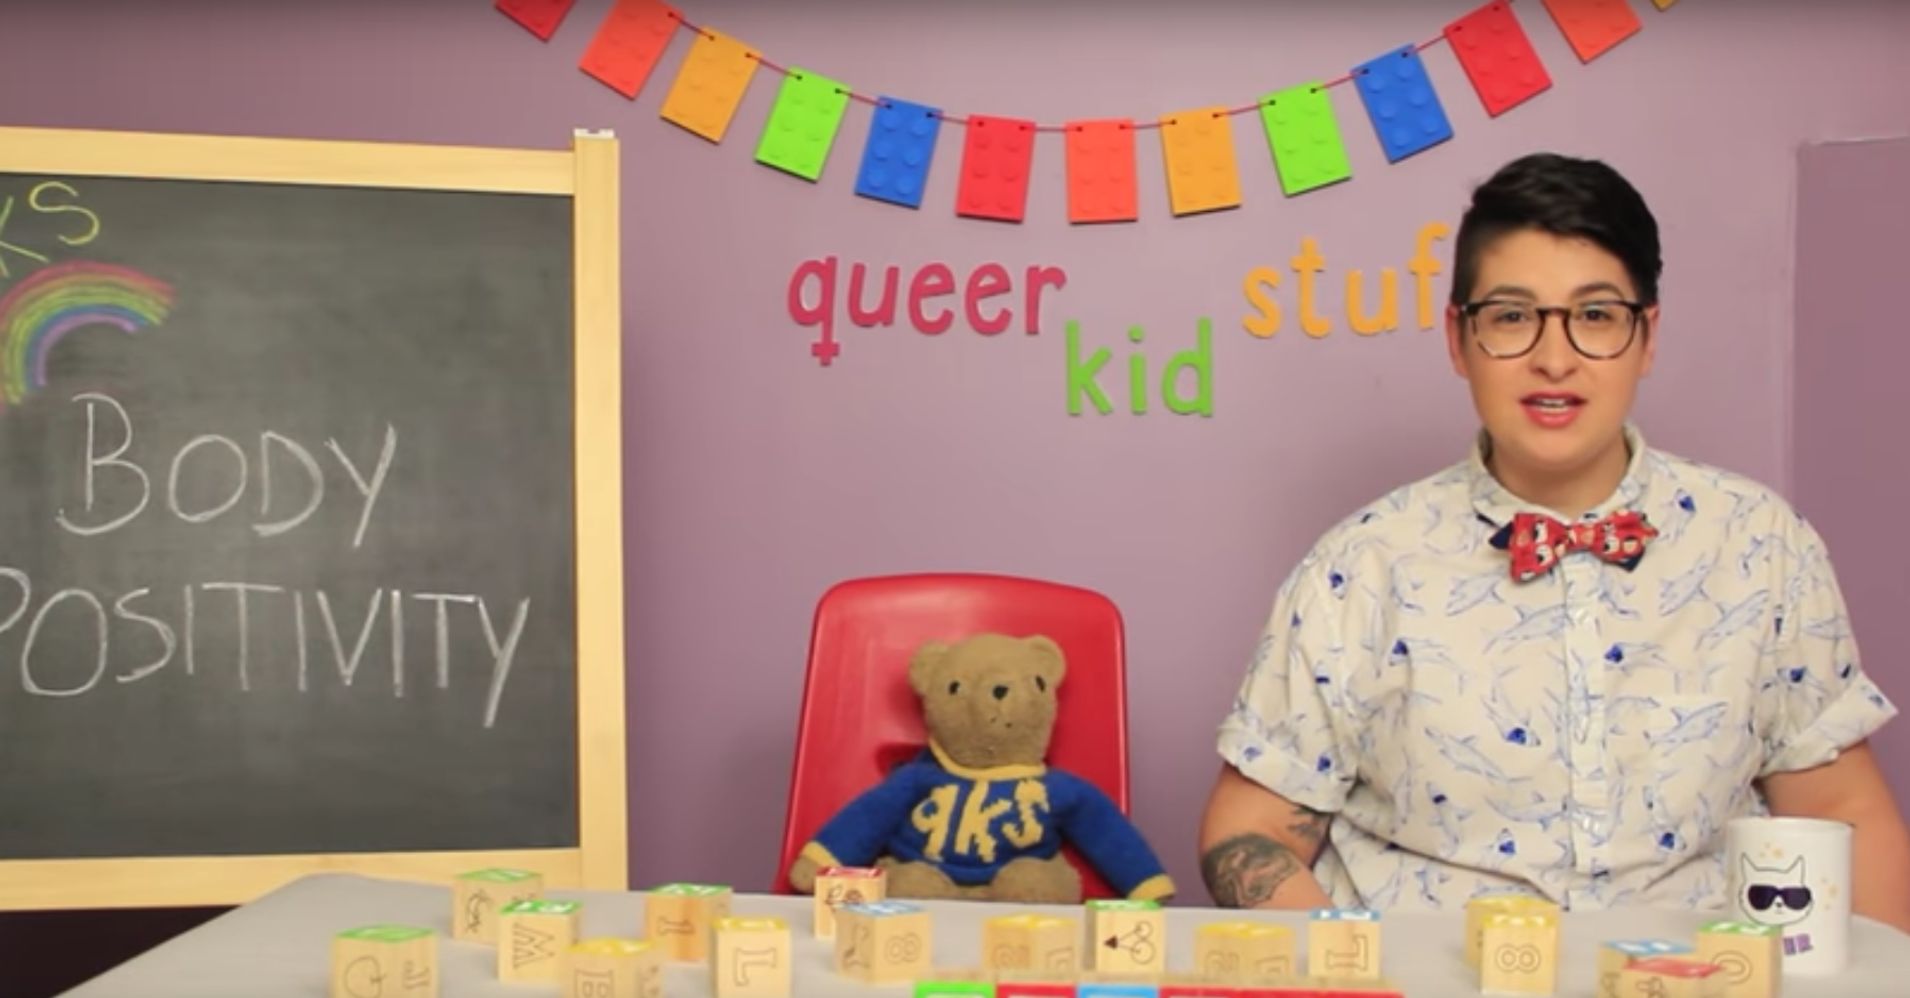 Here's A Great Way To Talk To Kids About Body Positivity